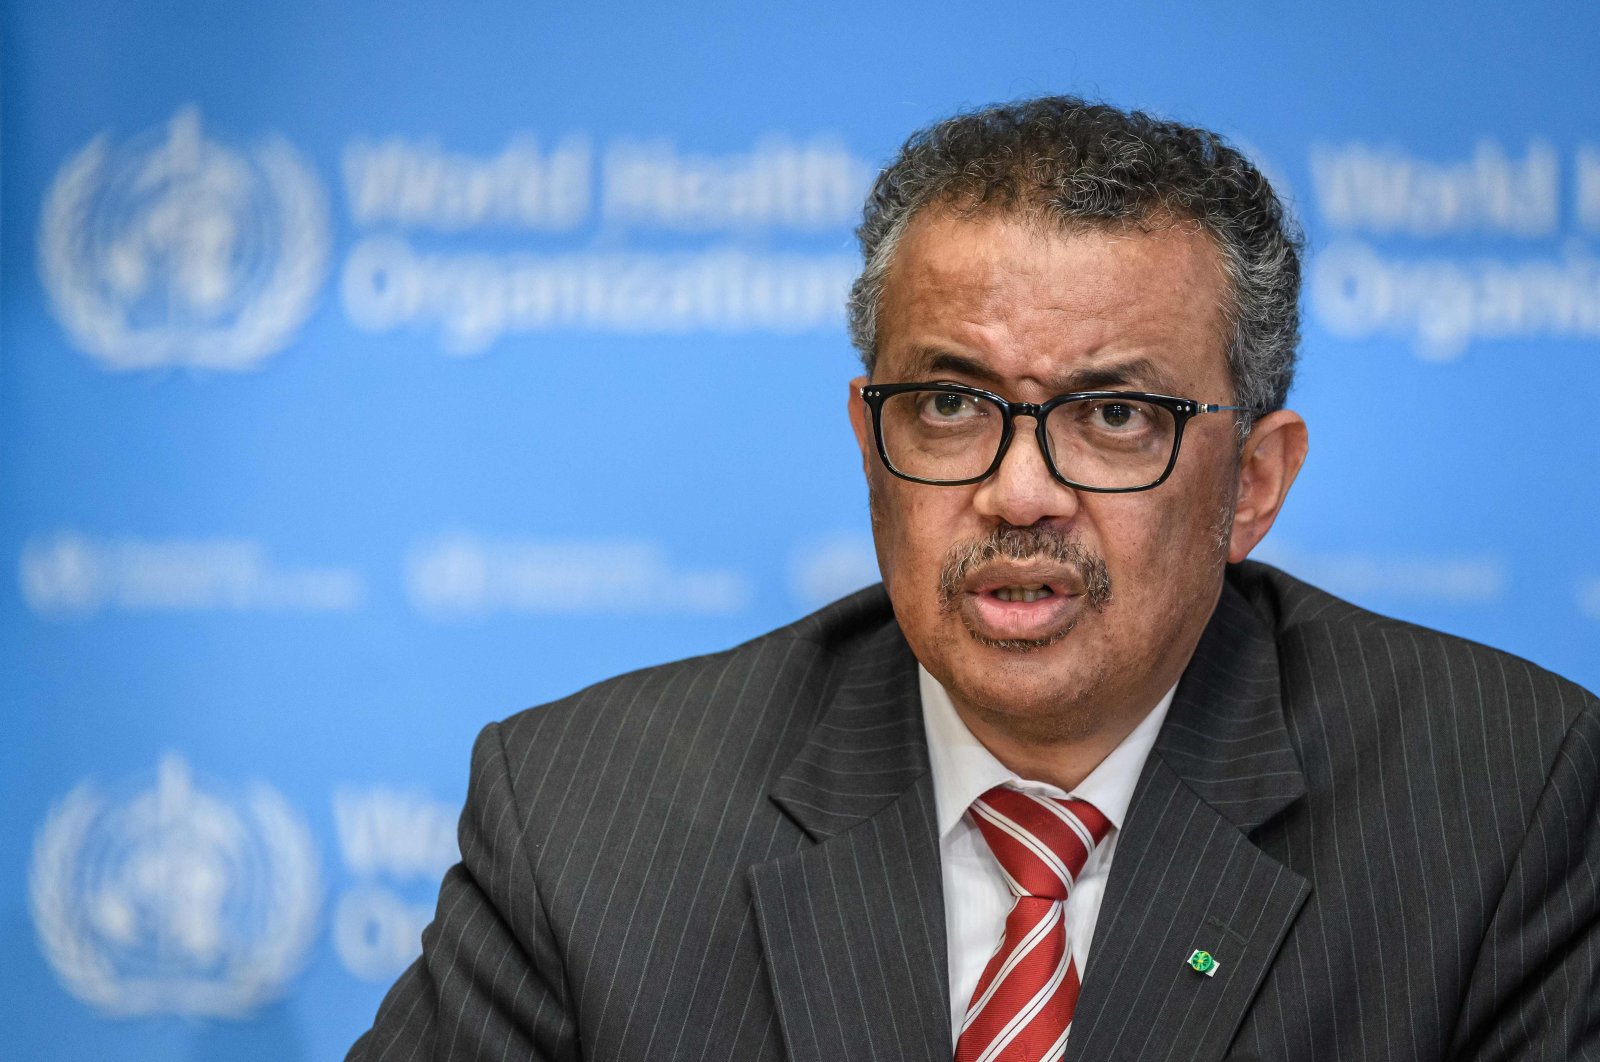 World Health Organization (WHO) Director-General Tedros Adhanom Ghebreyesus attends a daily press briefing on COVID-19 virus at the WHO headquaters, Geneva, March 11, 2020. (AFP Photo)